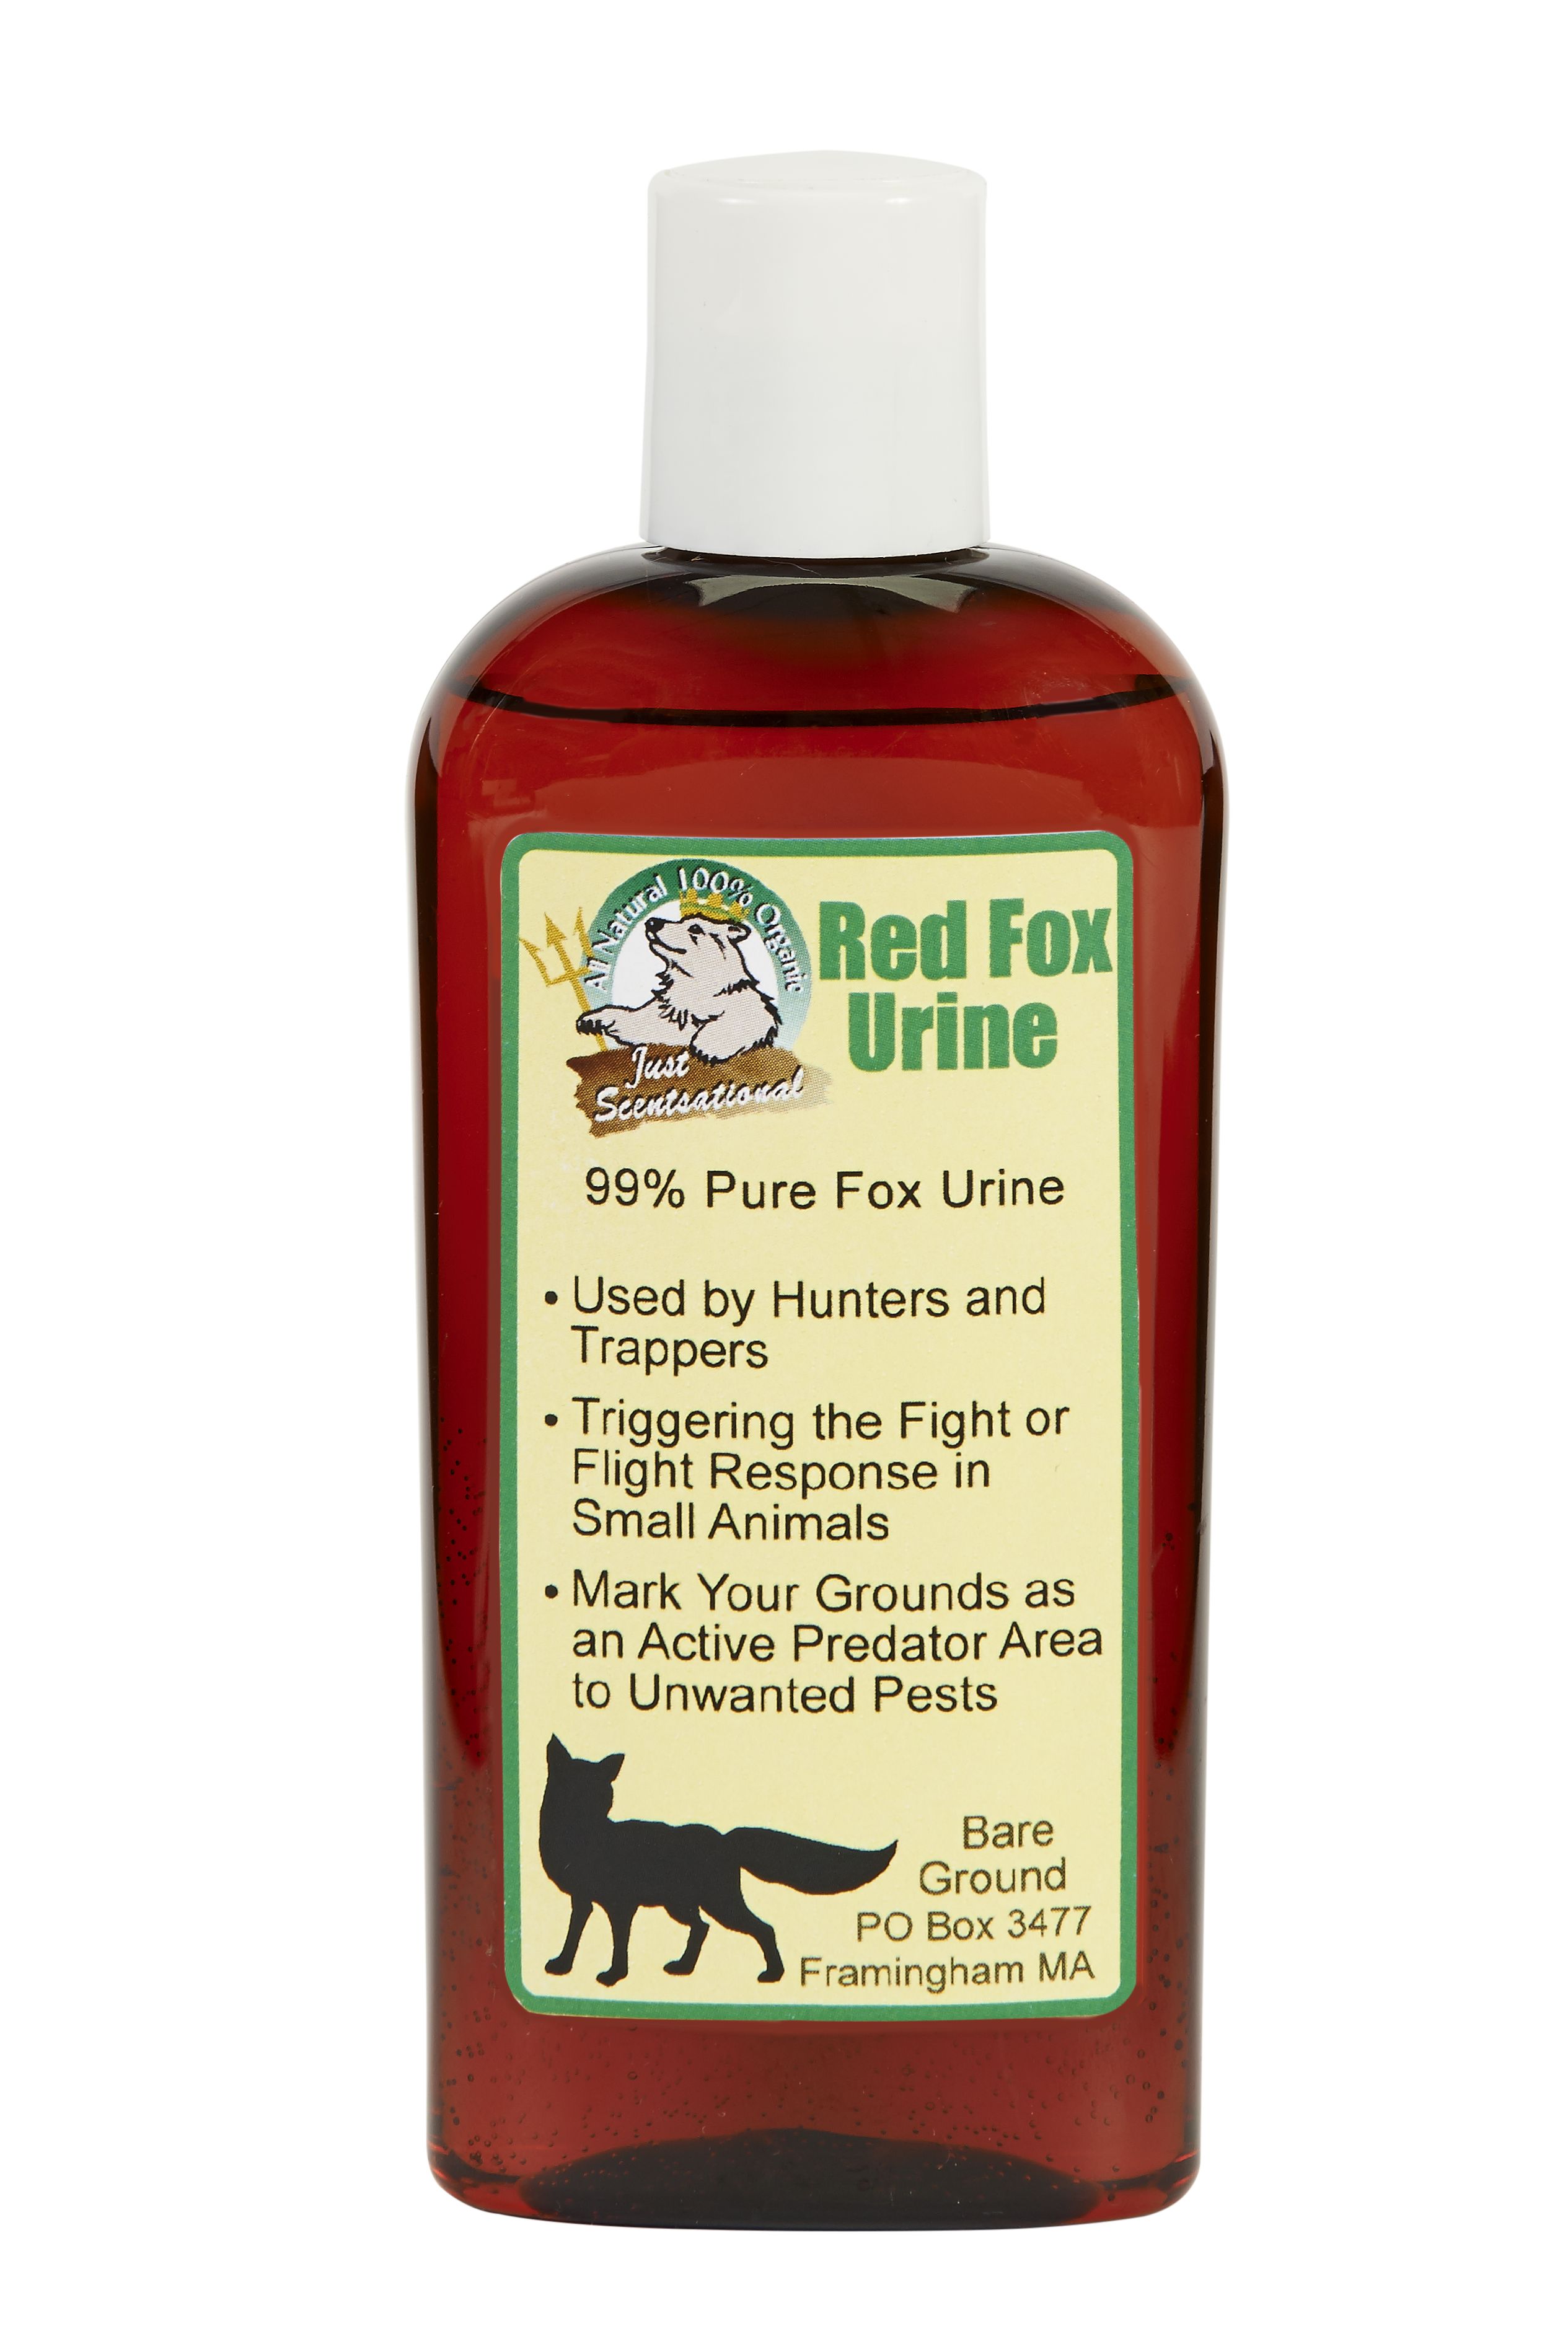 Details about   Just Scentsational Fox Urine Preditor Scent Gallon by Bare Ground 